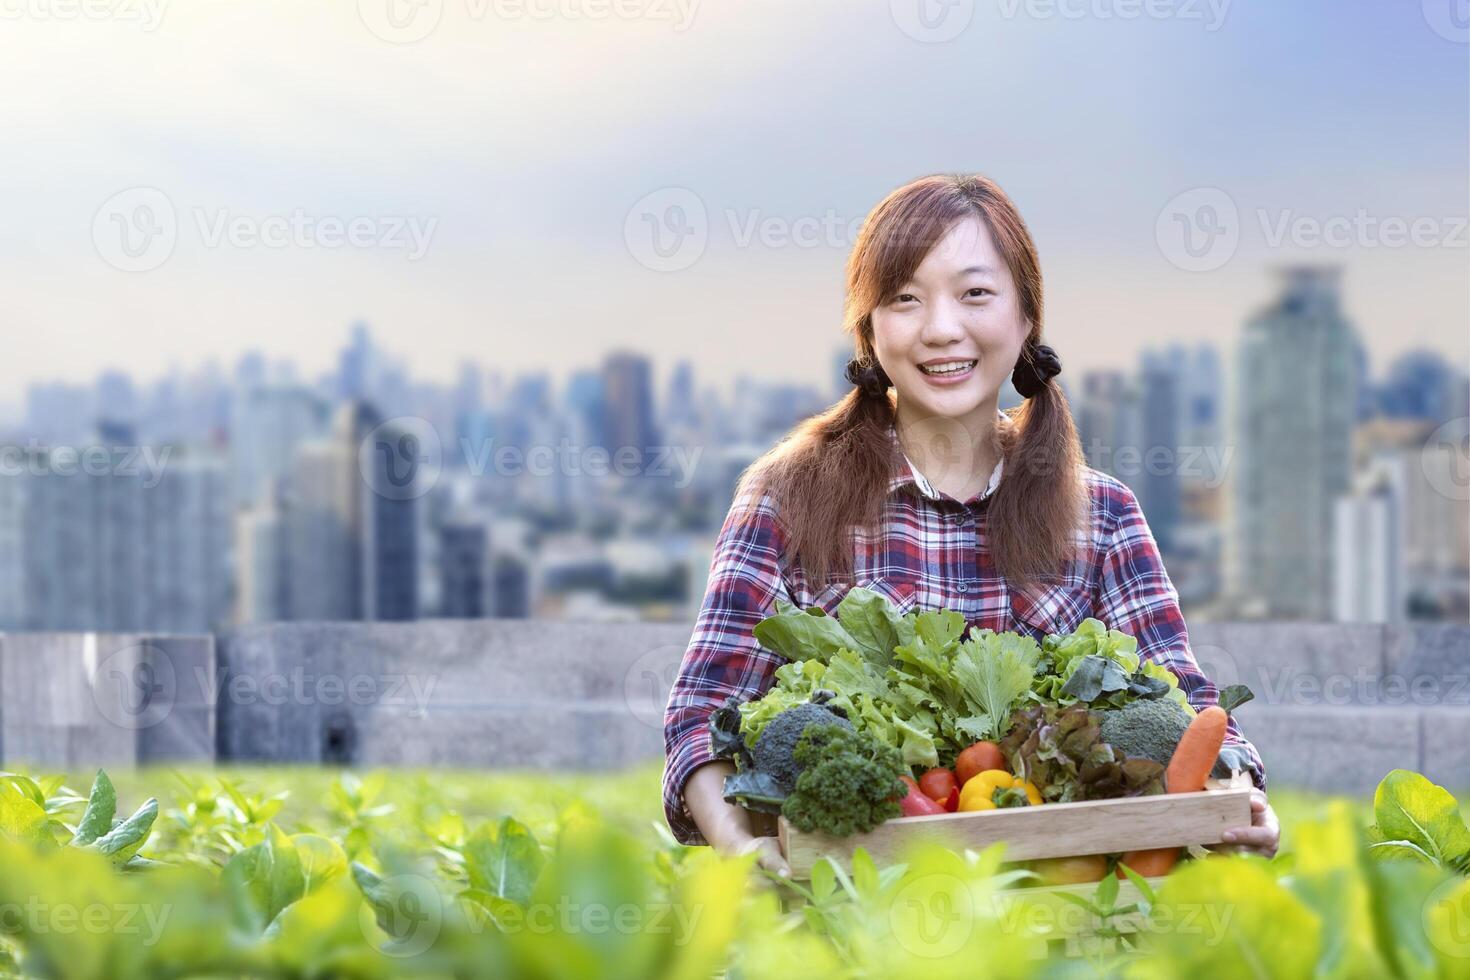 Asian woman gardener is harvesting organics vegetable while working at rooftop urban farming futuristic city sustainable gardening on the limited space to reduce carbon footprint and food security photo